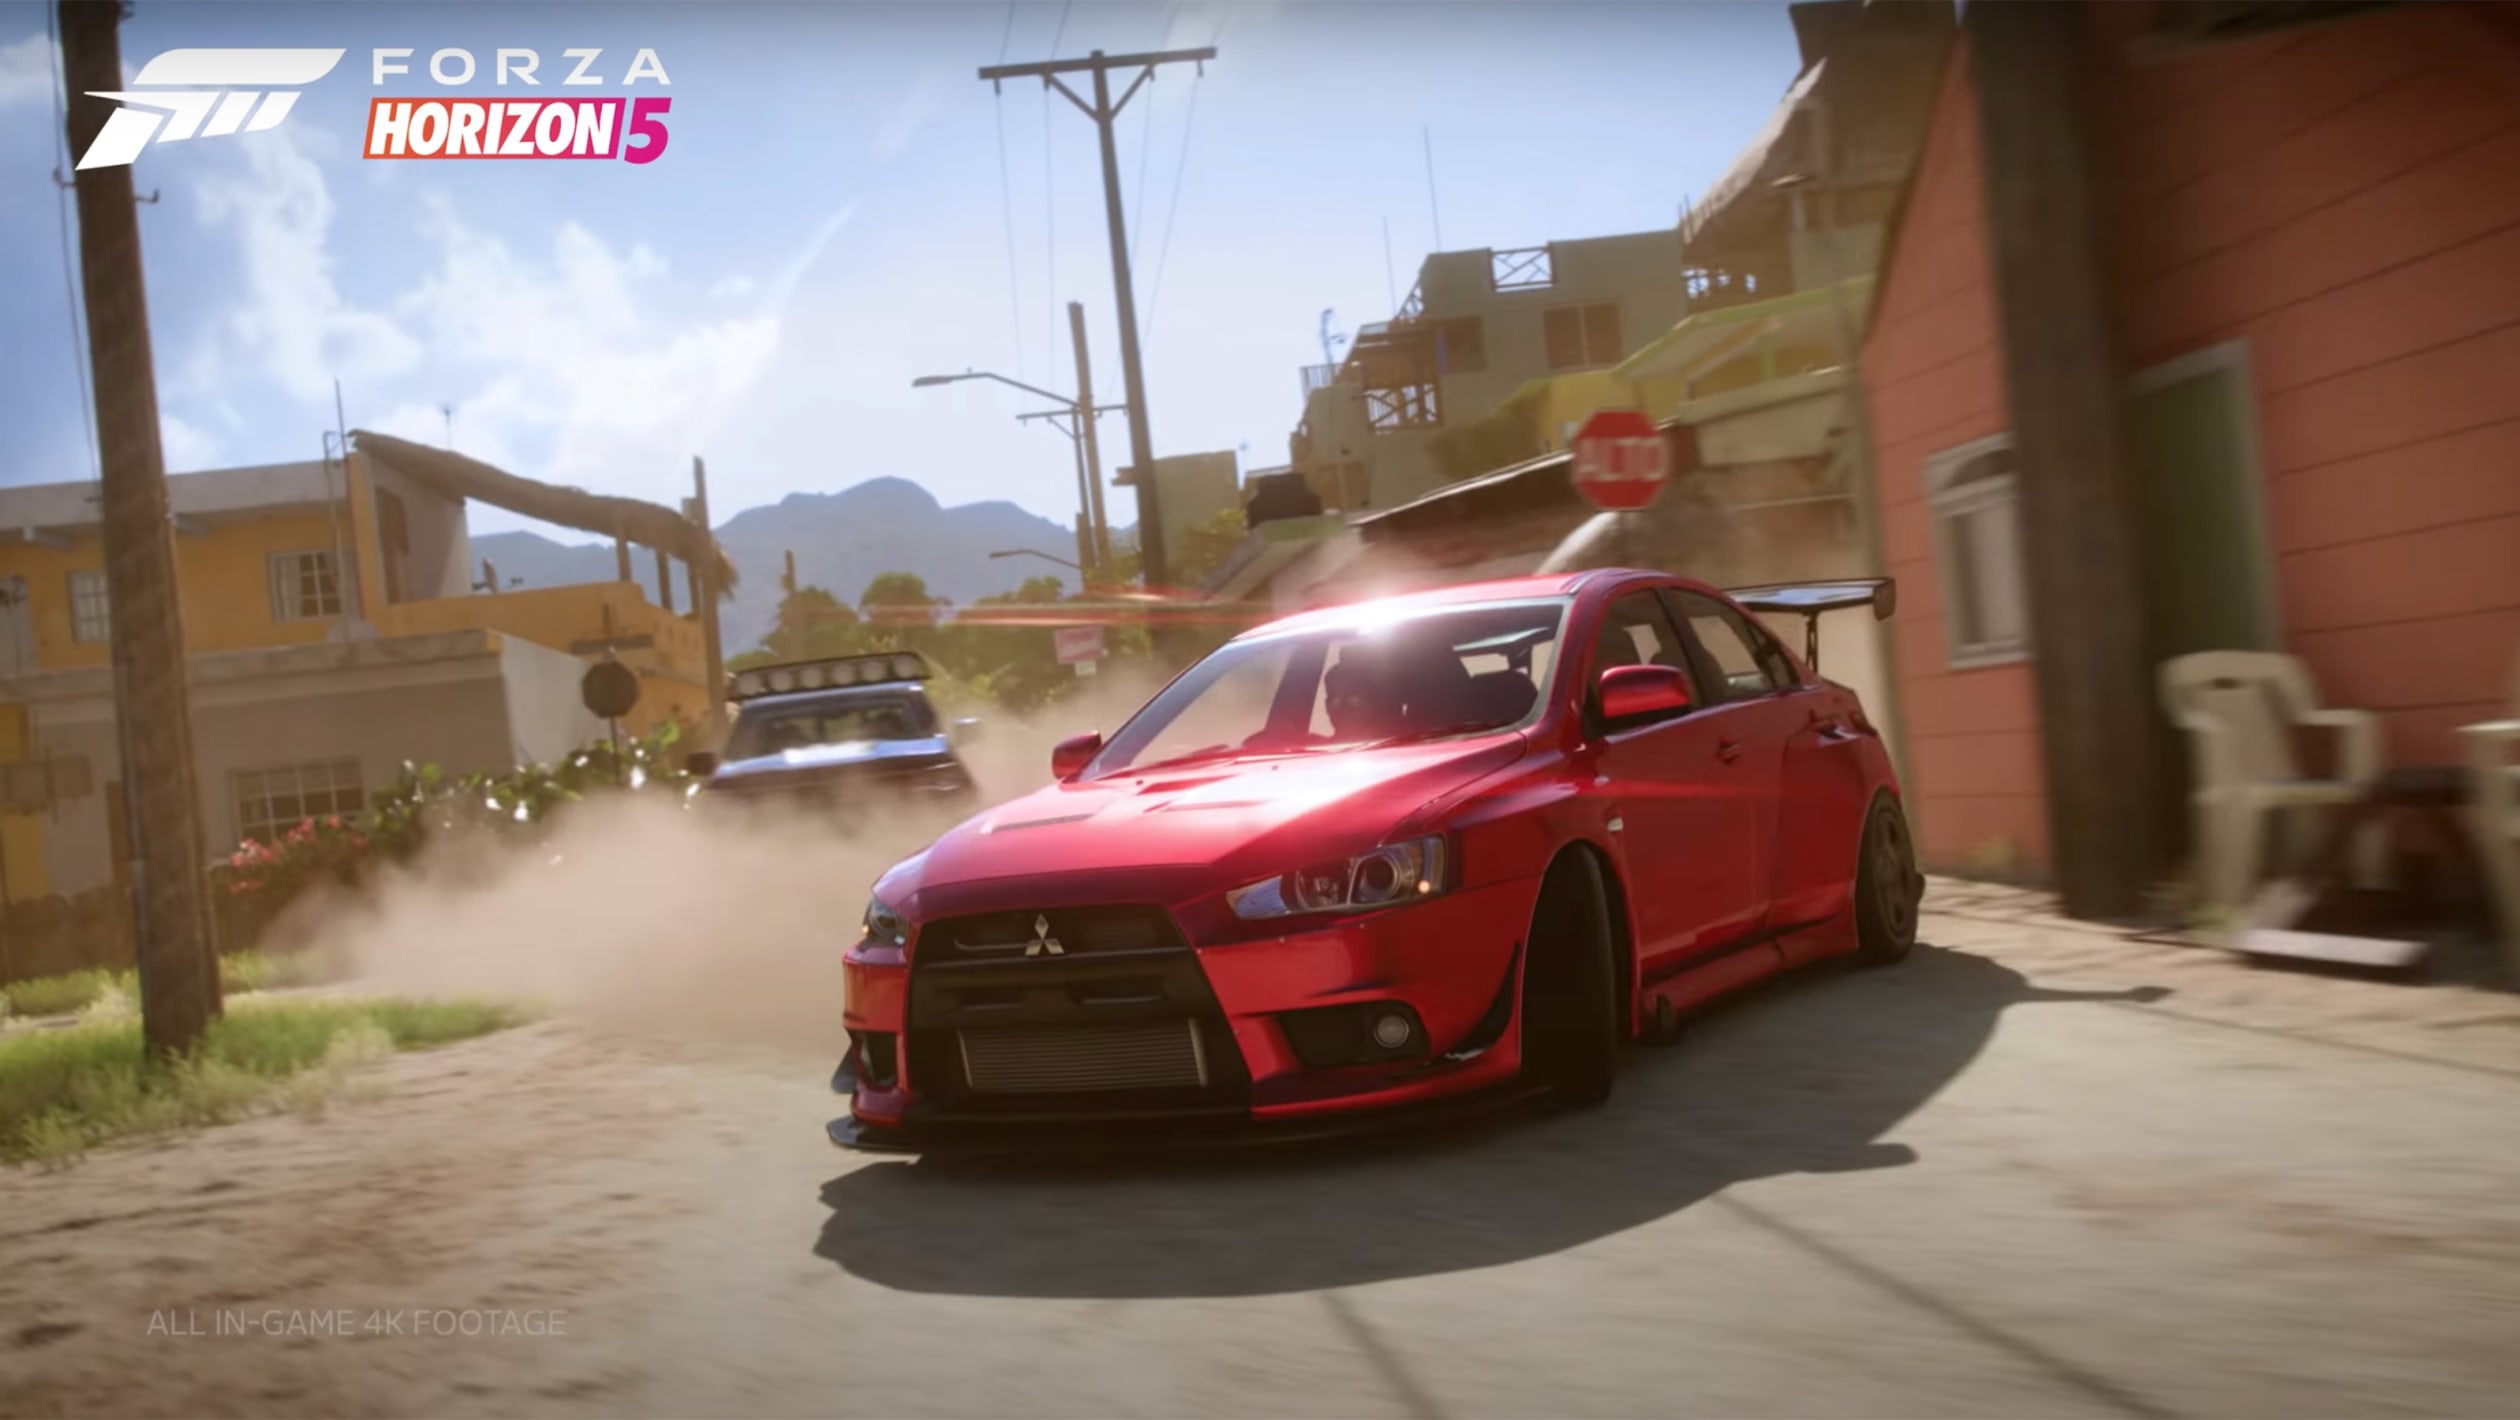 Almost 500 Cars Confirmed For Forza Horizon 5 Including A Number Of Unique Forza Edition Models Carscoops